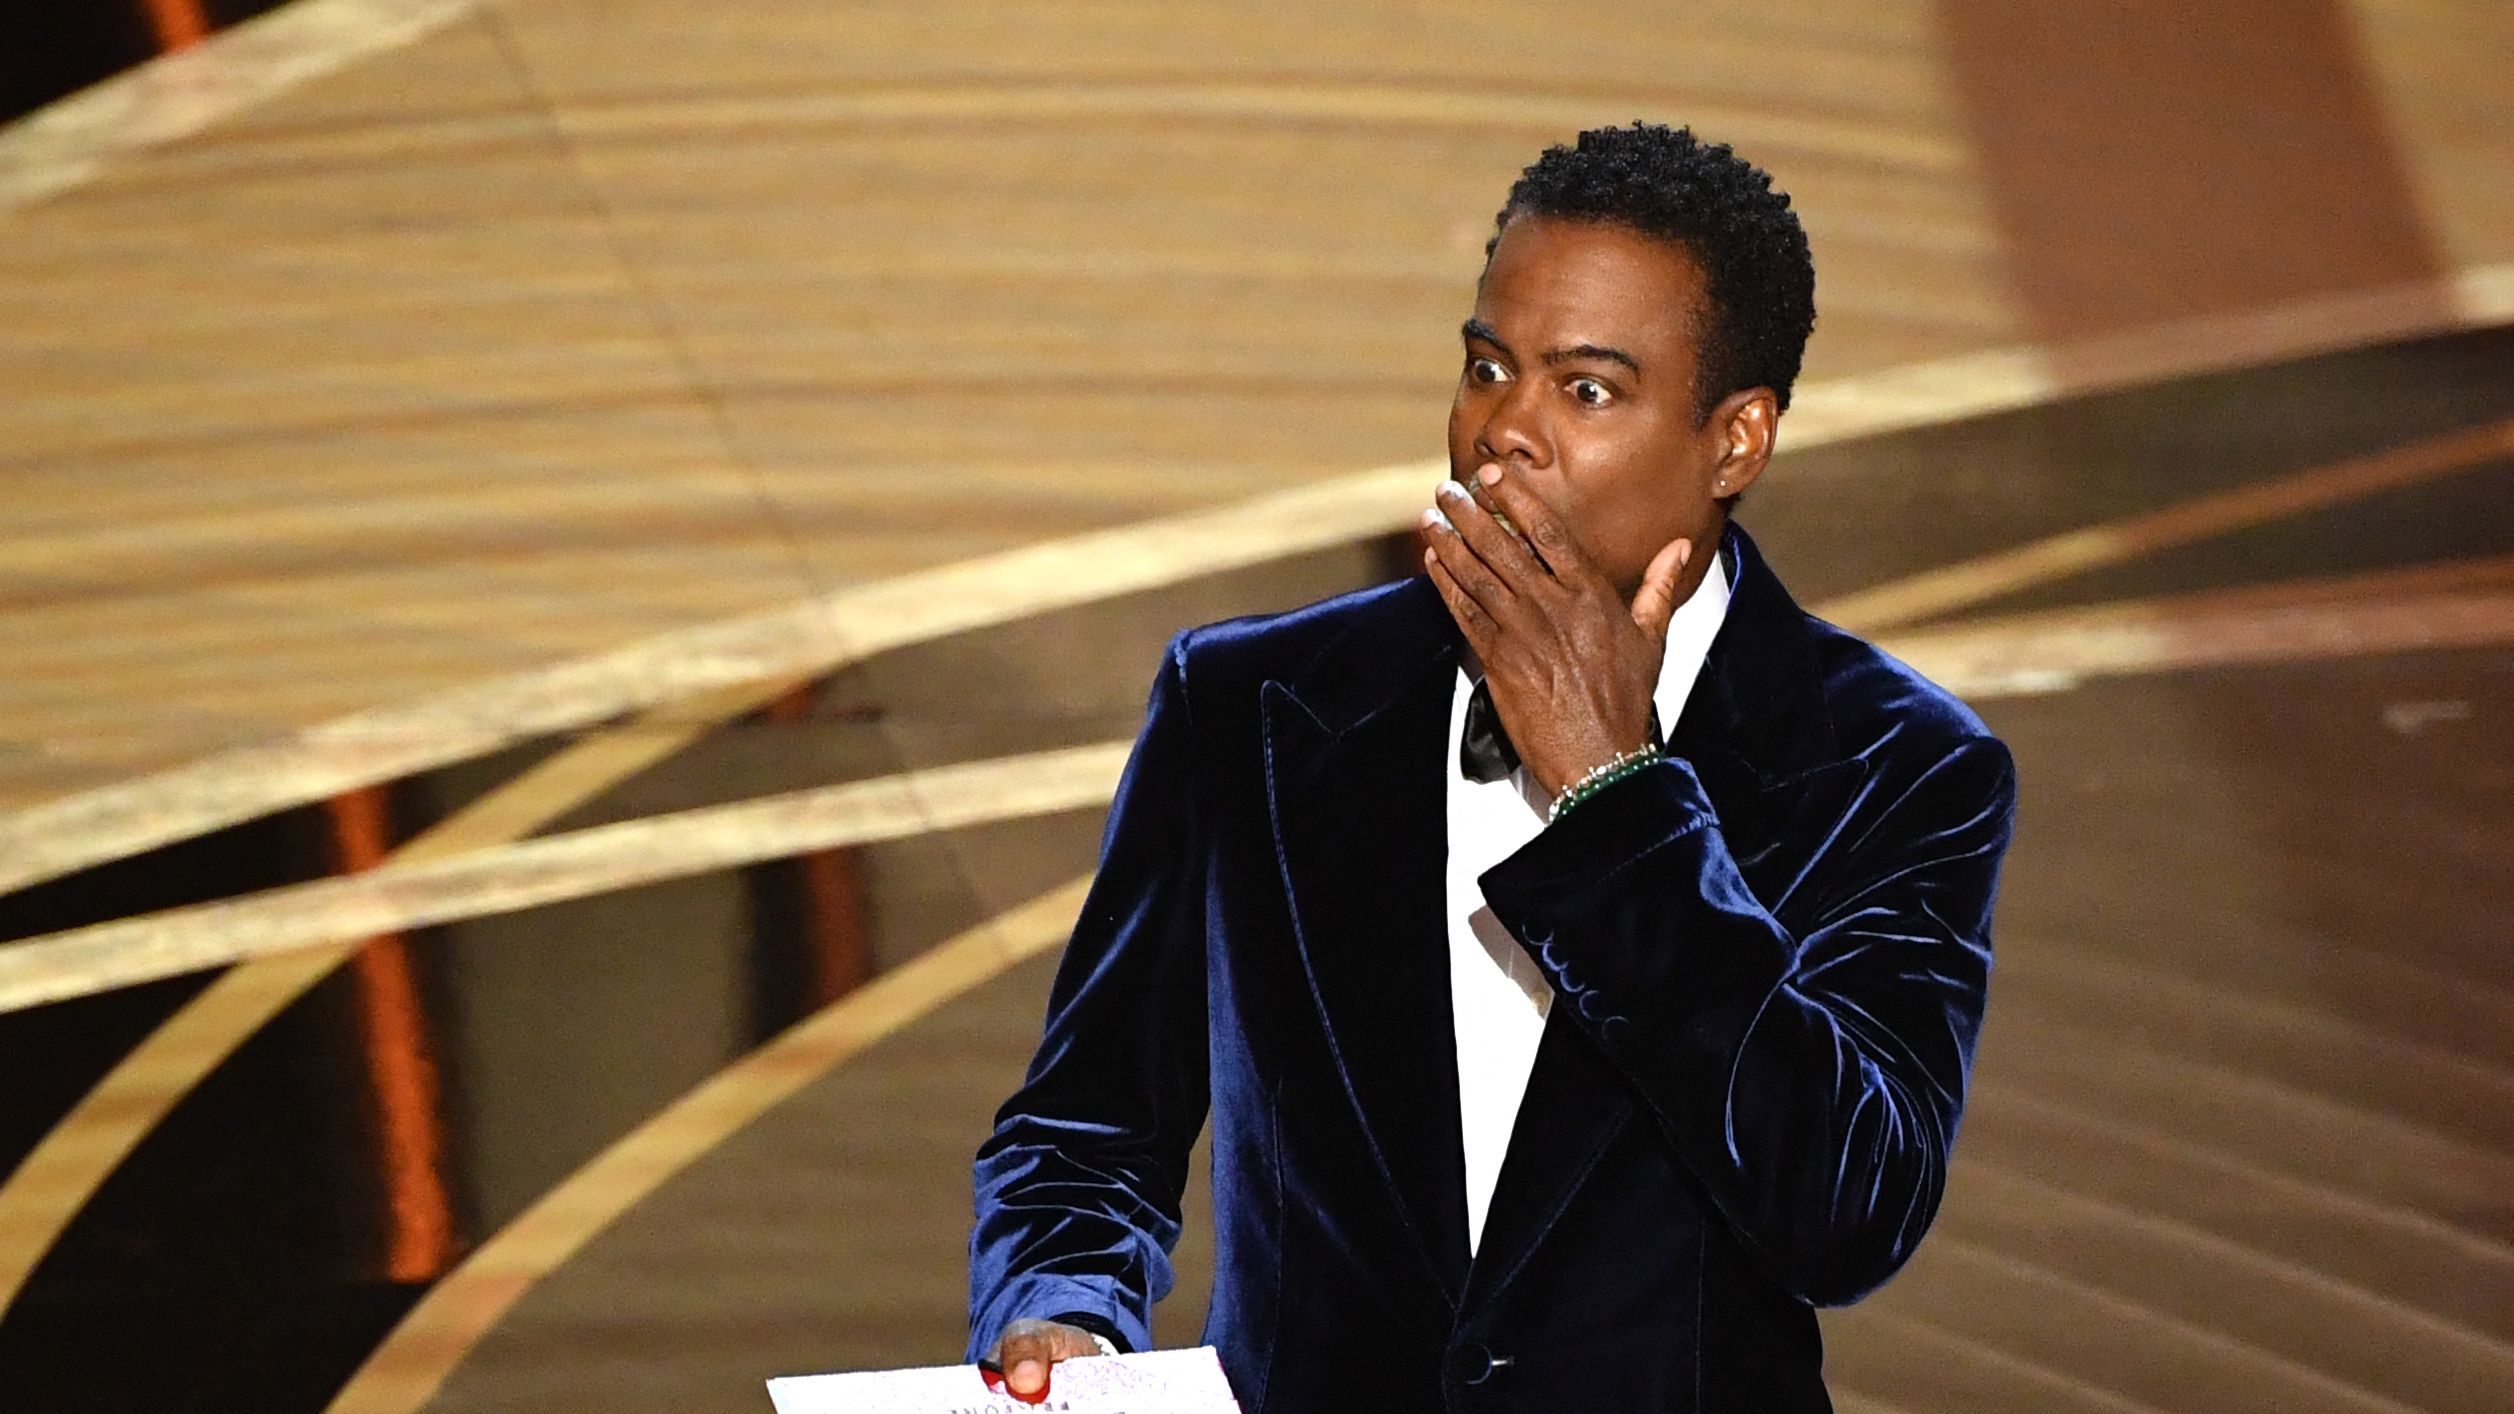 Oscars will have a host again in 2022